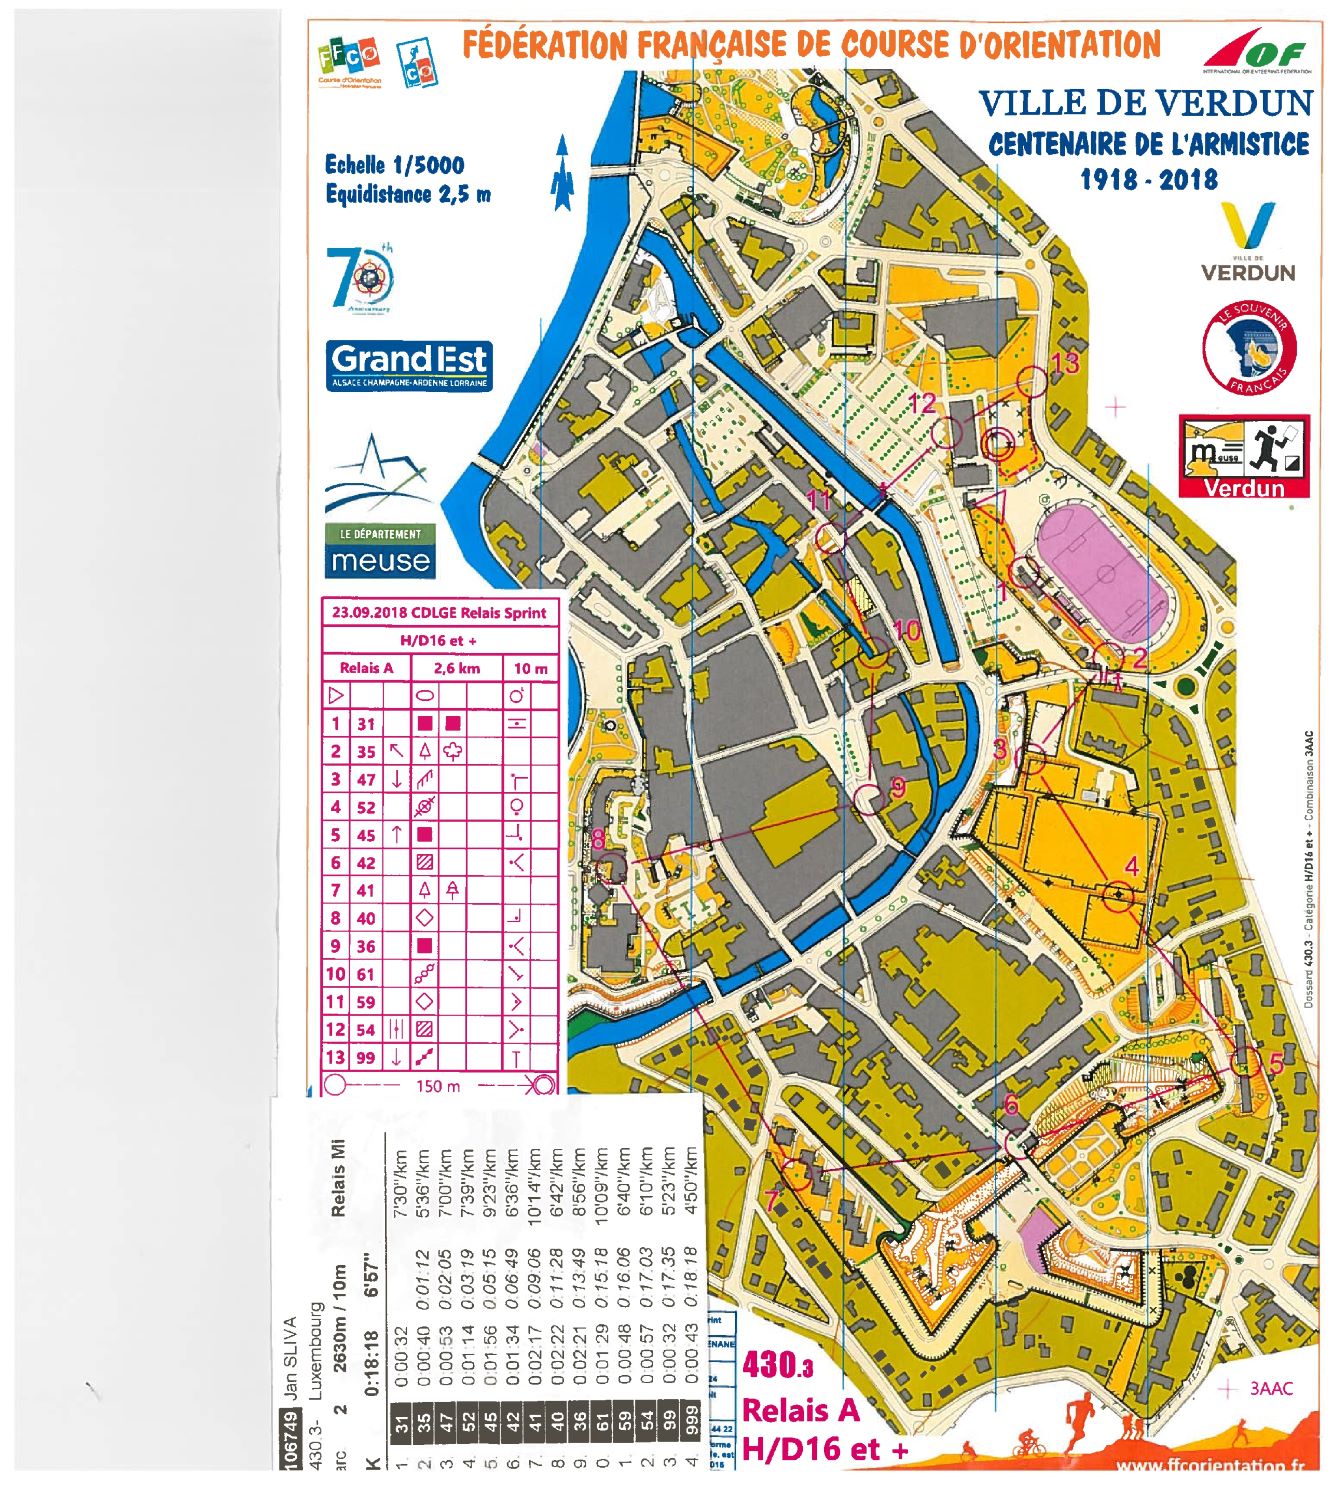 Mixed Sprint Relay - Championship of the Grand-Est Region (24-09-2018)